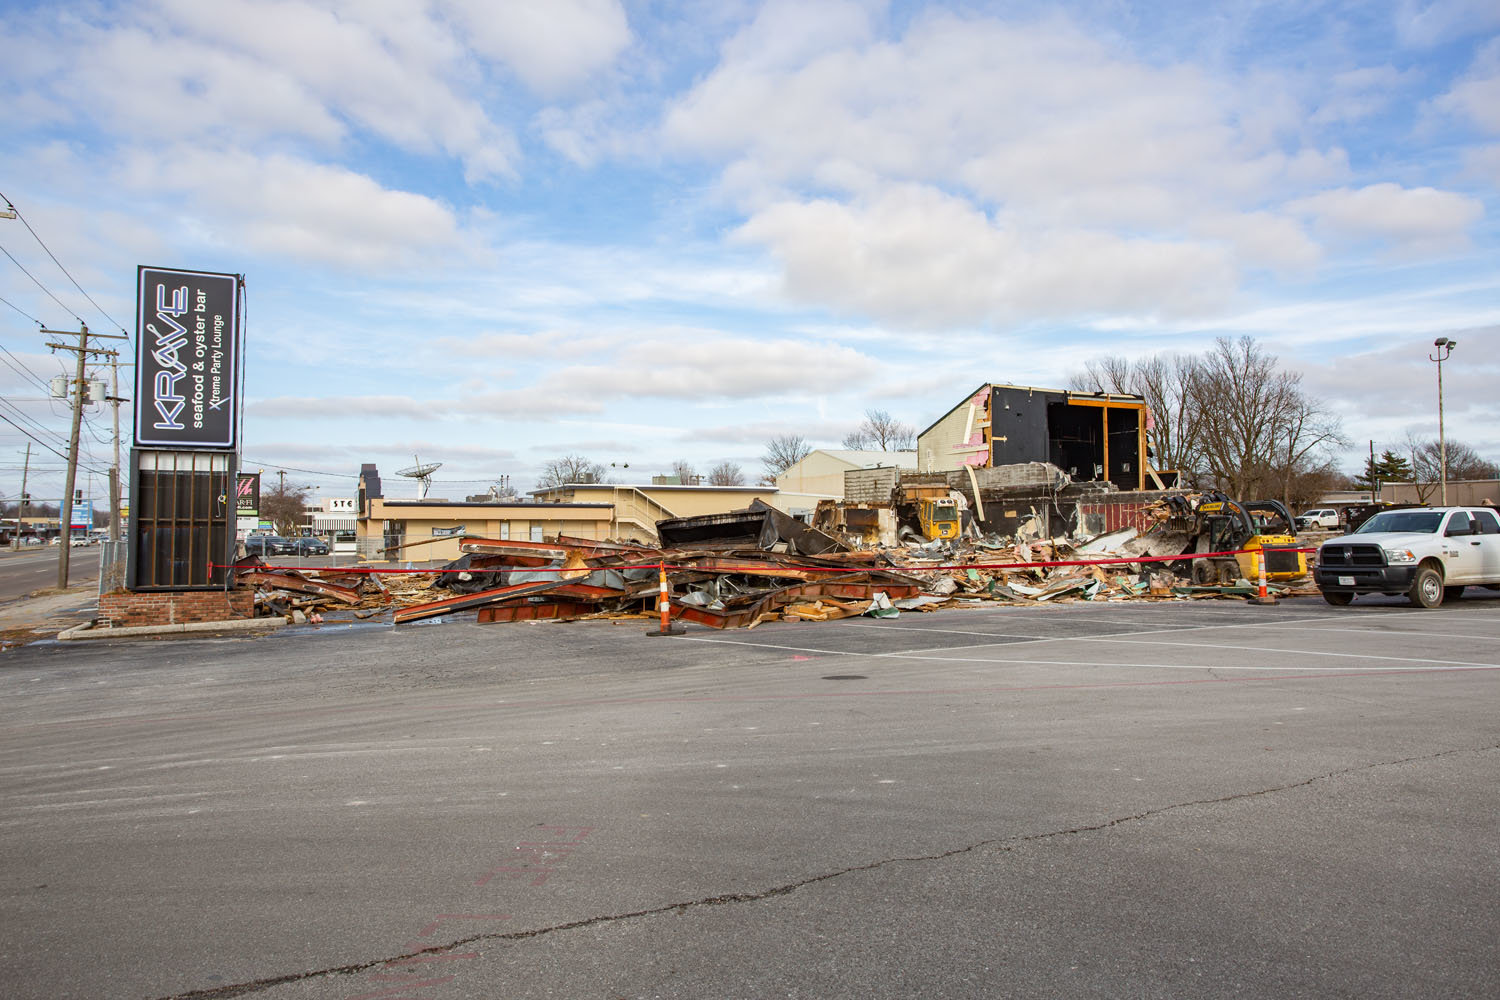 KRAVE NO MORE
Krave Seafood & Oyster Bar on South Glenstone Avenue is demolished Jan. 14, months after a summertime fire shut down the restaurant and music venue. Owners Mark Schwien and Teresa Chism have said they expect to sell the property and look for another location.